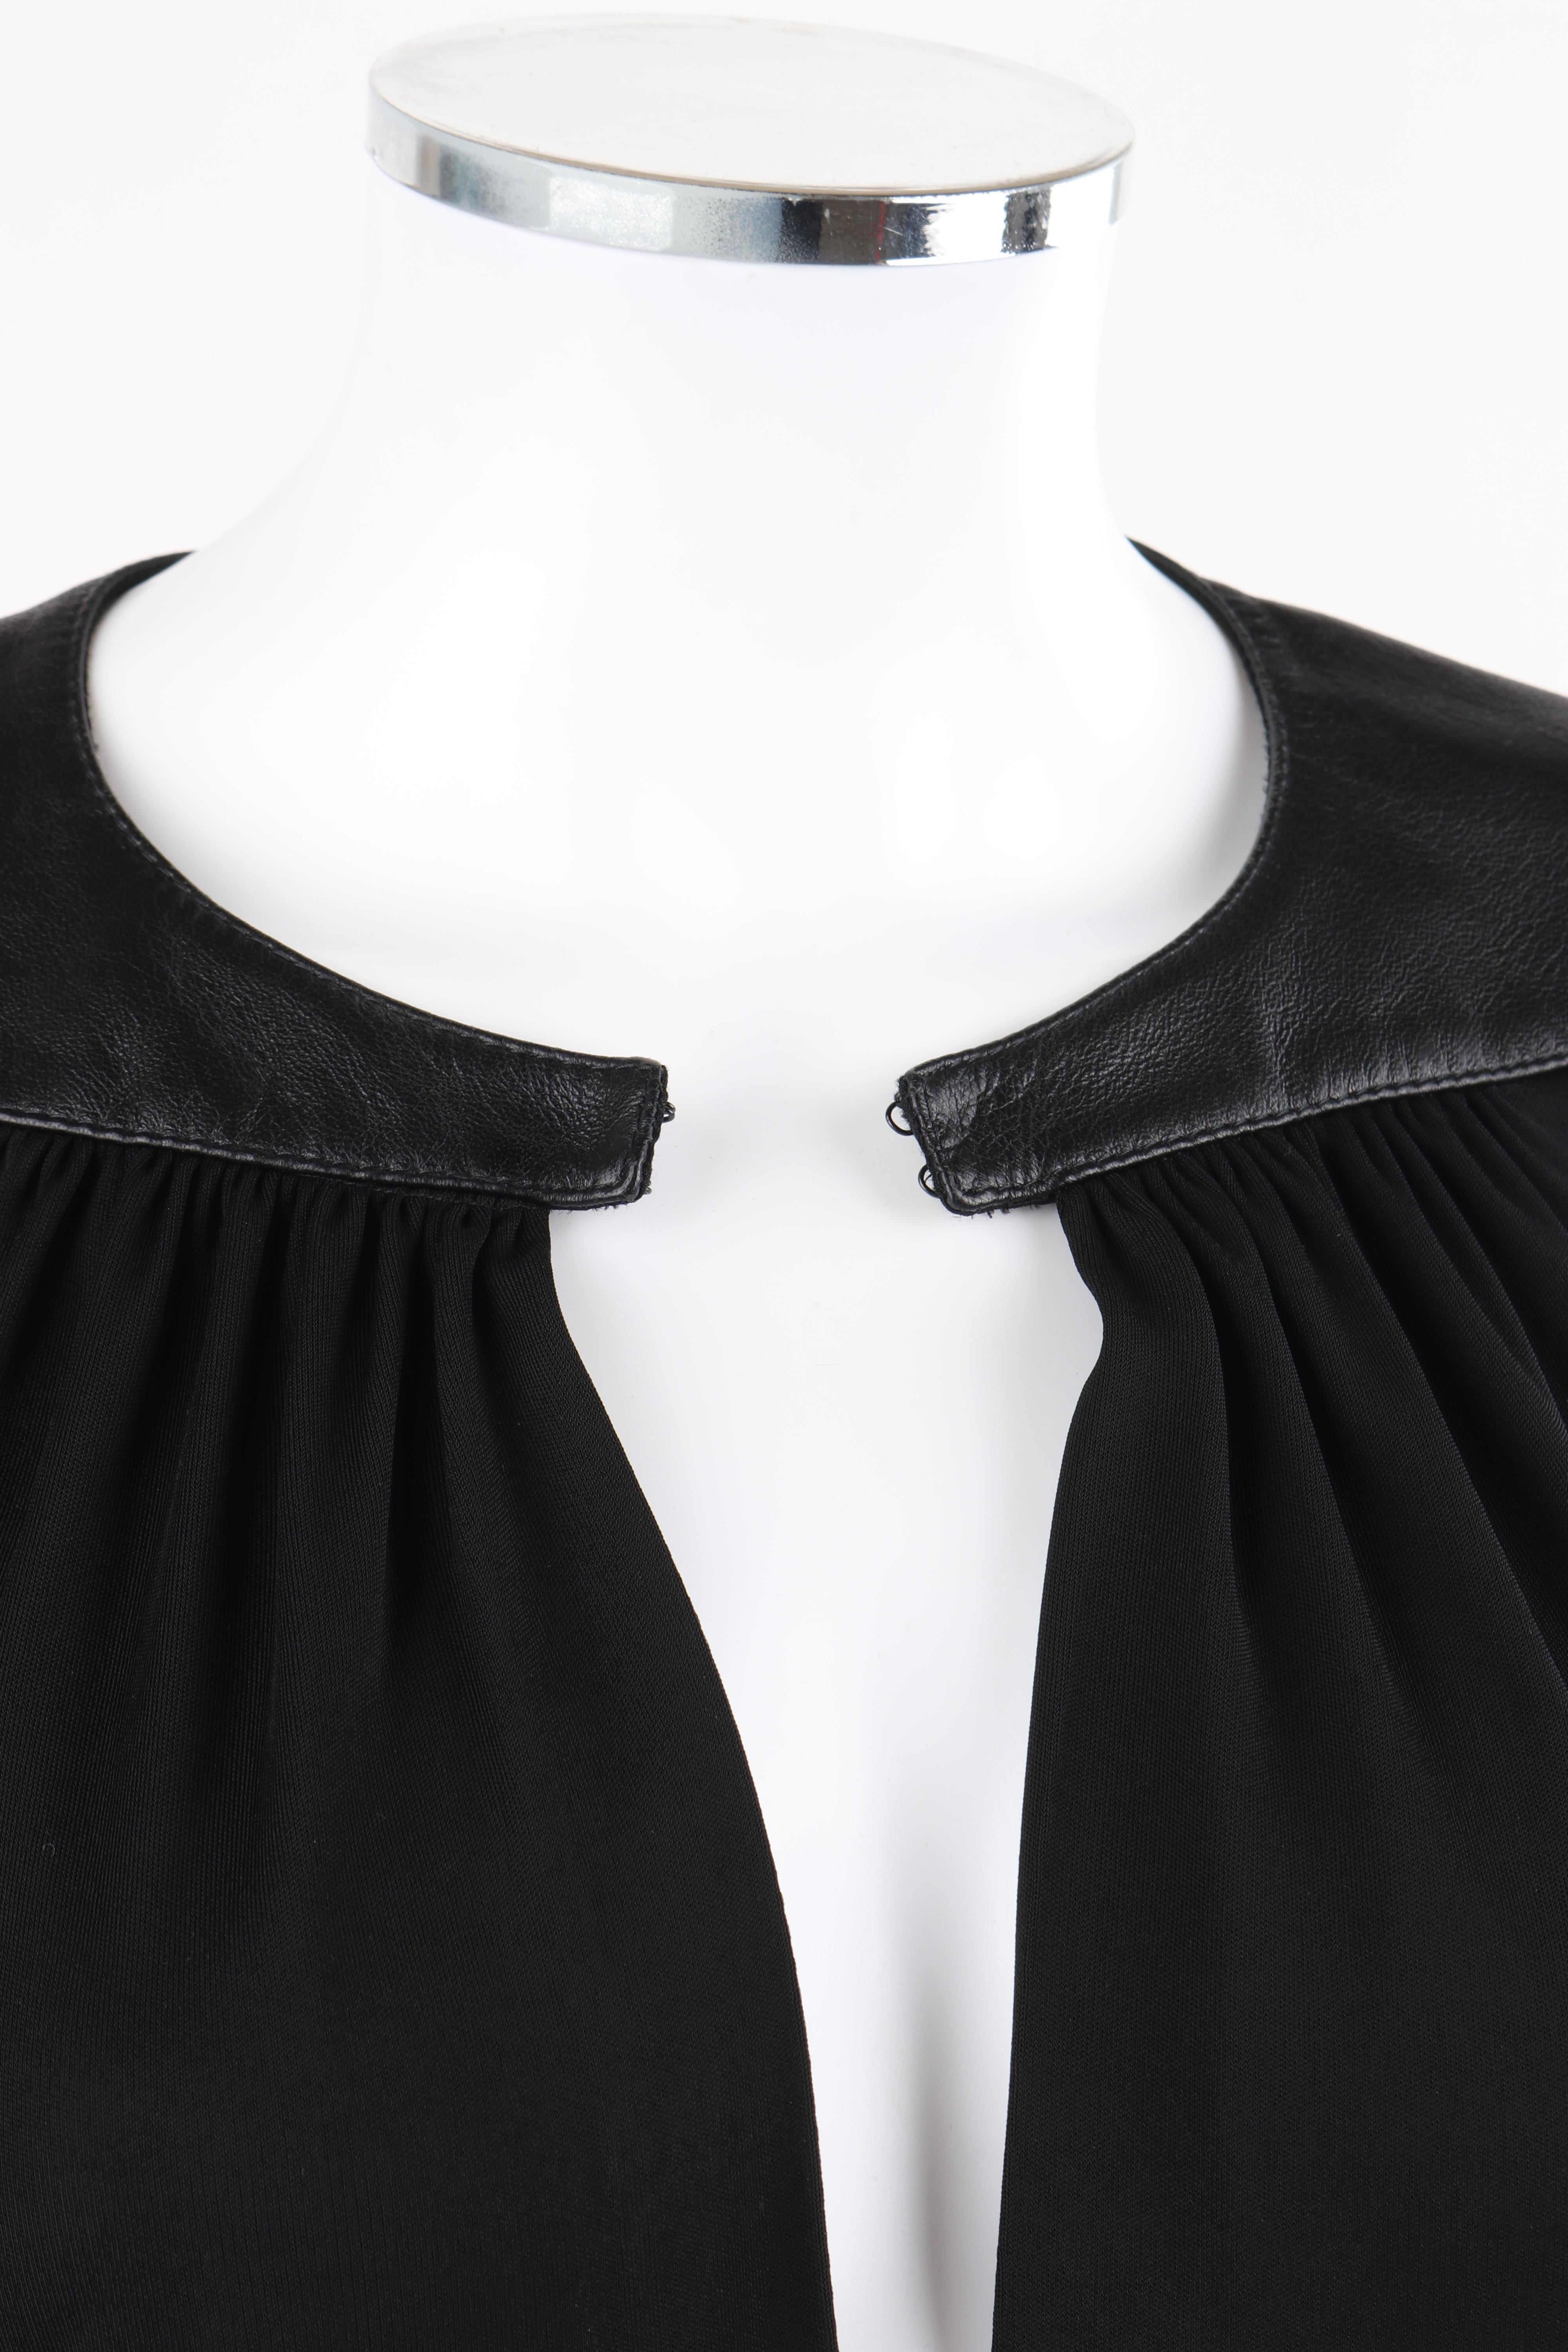 GIANNI VERSACE Couture A/W 1997 Black Cutout Leather Knit Gather Pleated Blouse  For Sale 3